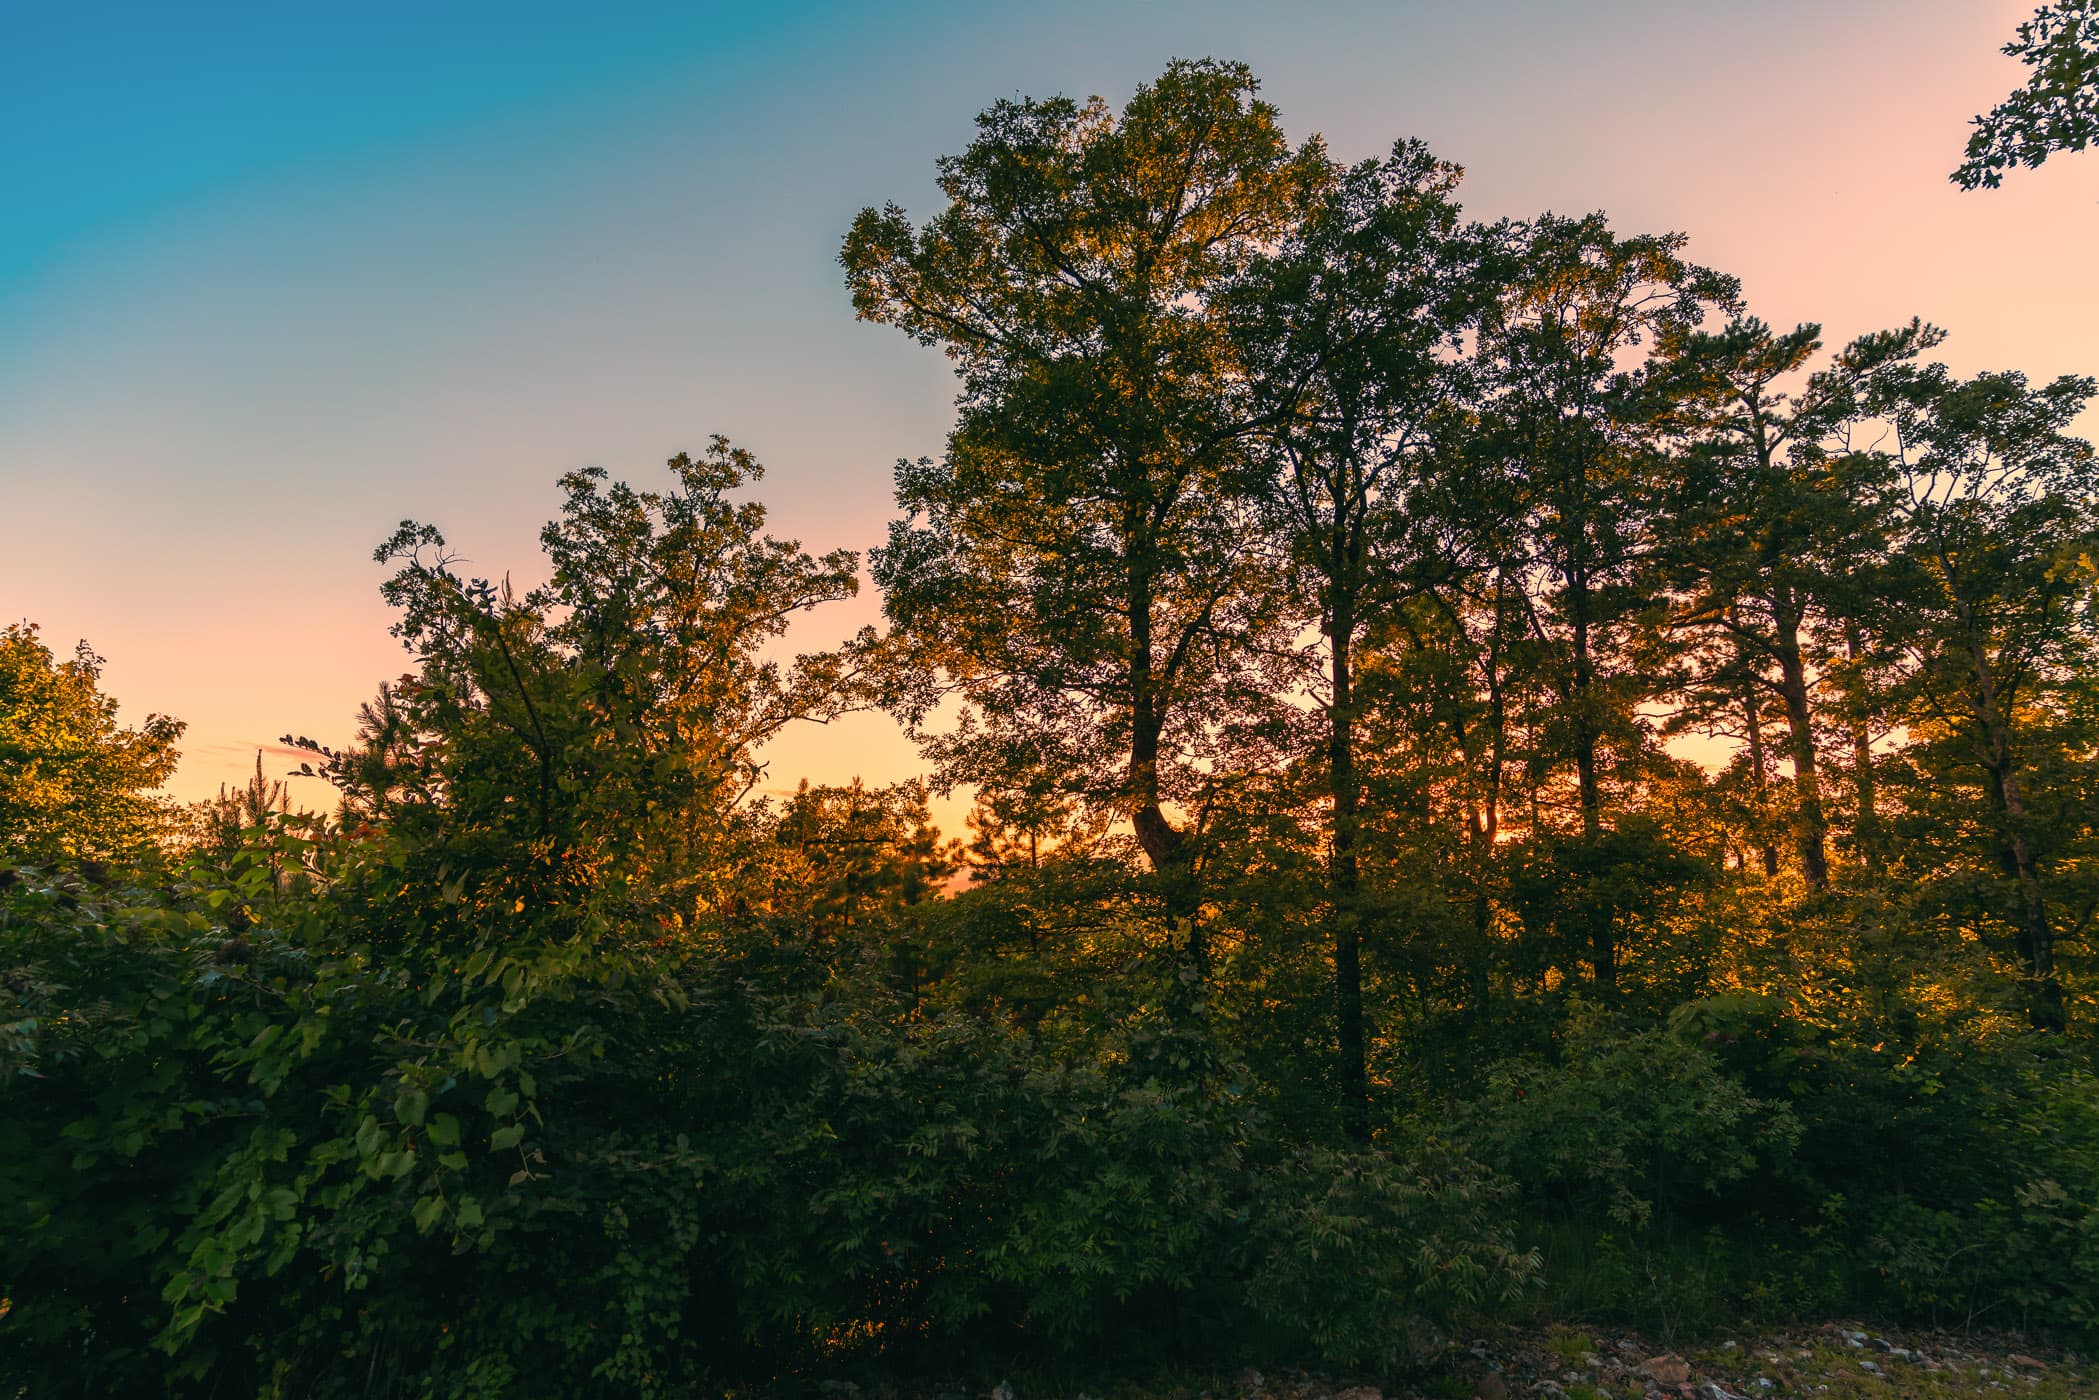 As the sun dips below the horizon, it casts a warm glow over a cluster of trees near Mena, Arkansas, signaling the end of another beautiful day.